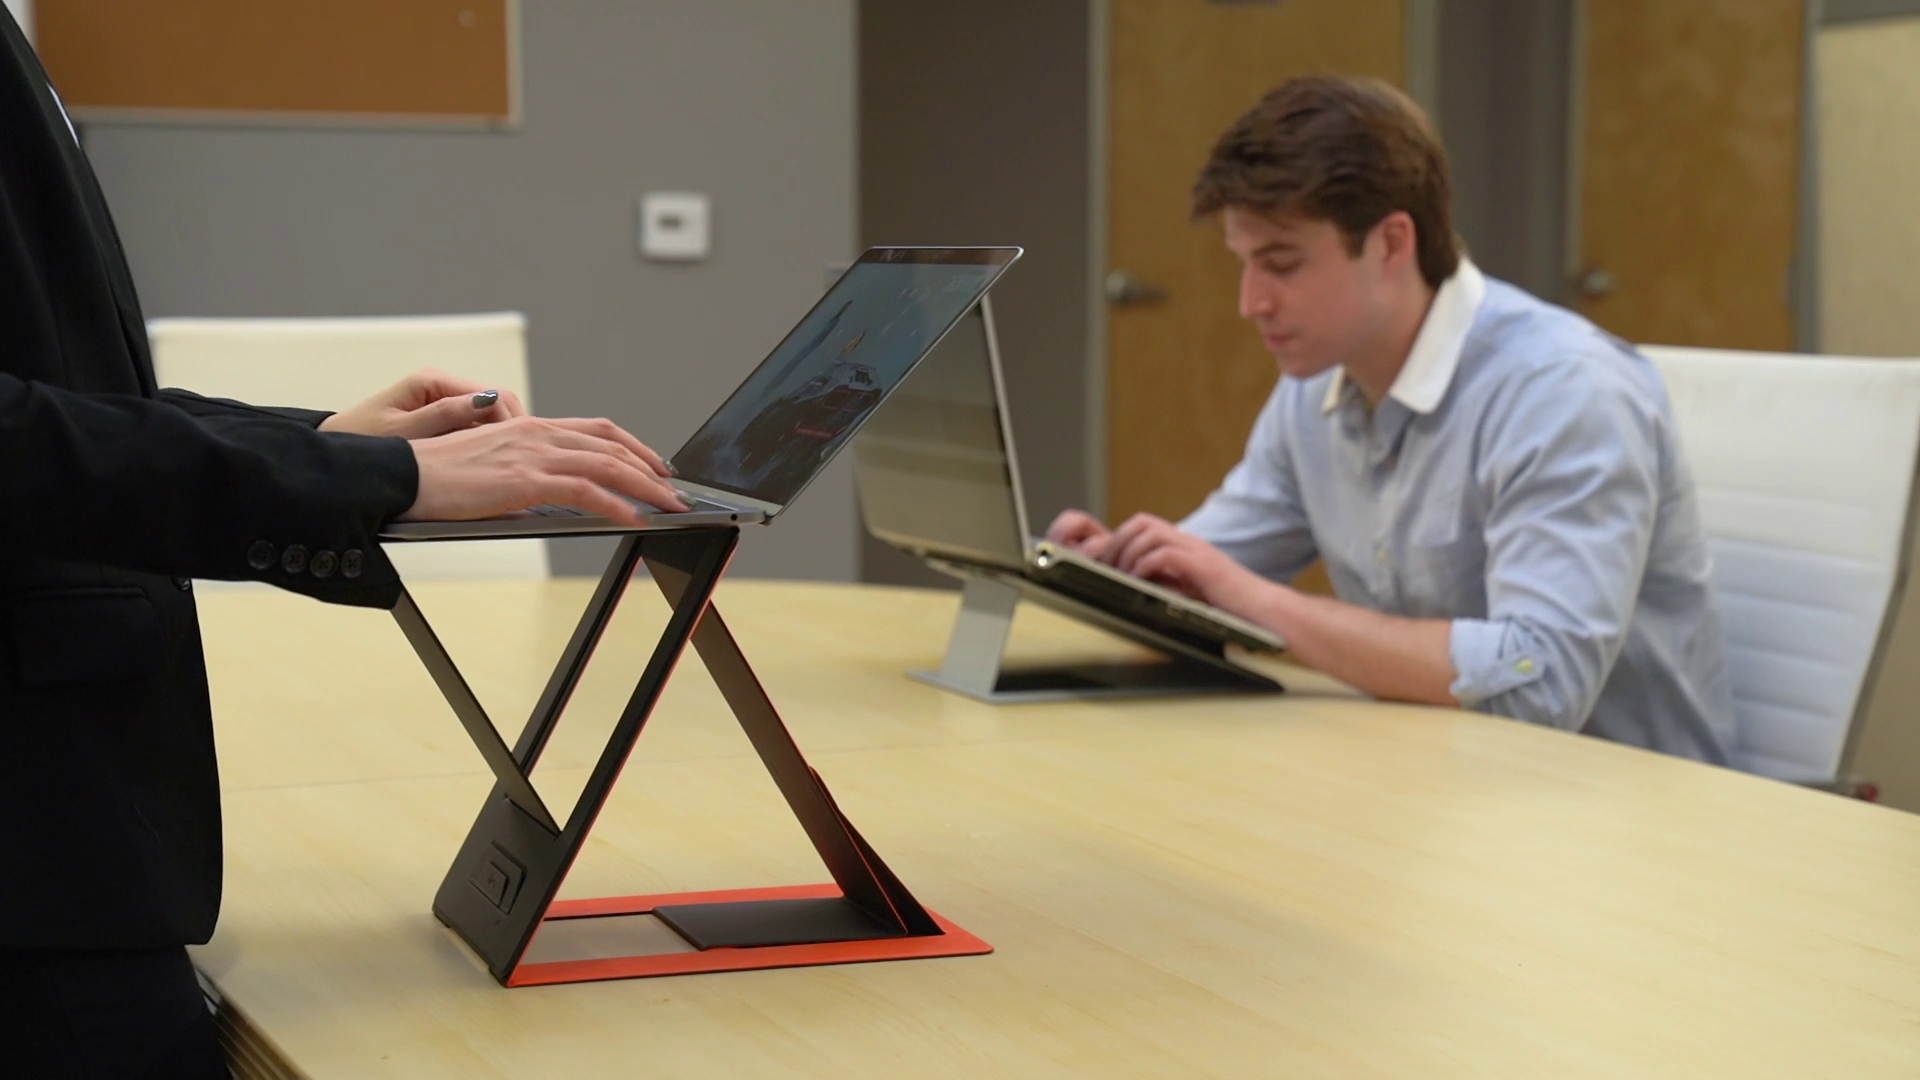 The Moft Z Is A Super Portable Standing Desk That S Hitting